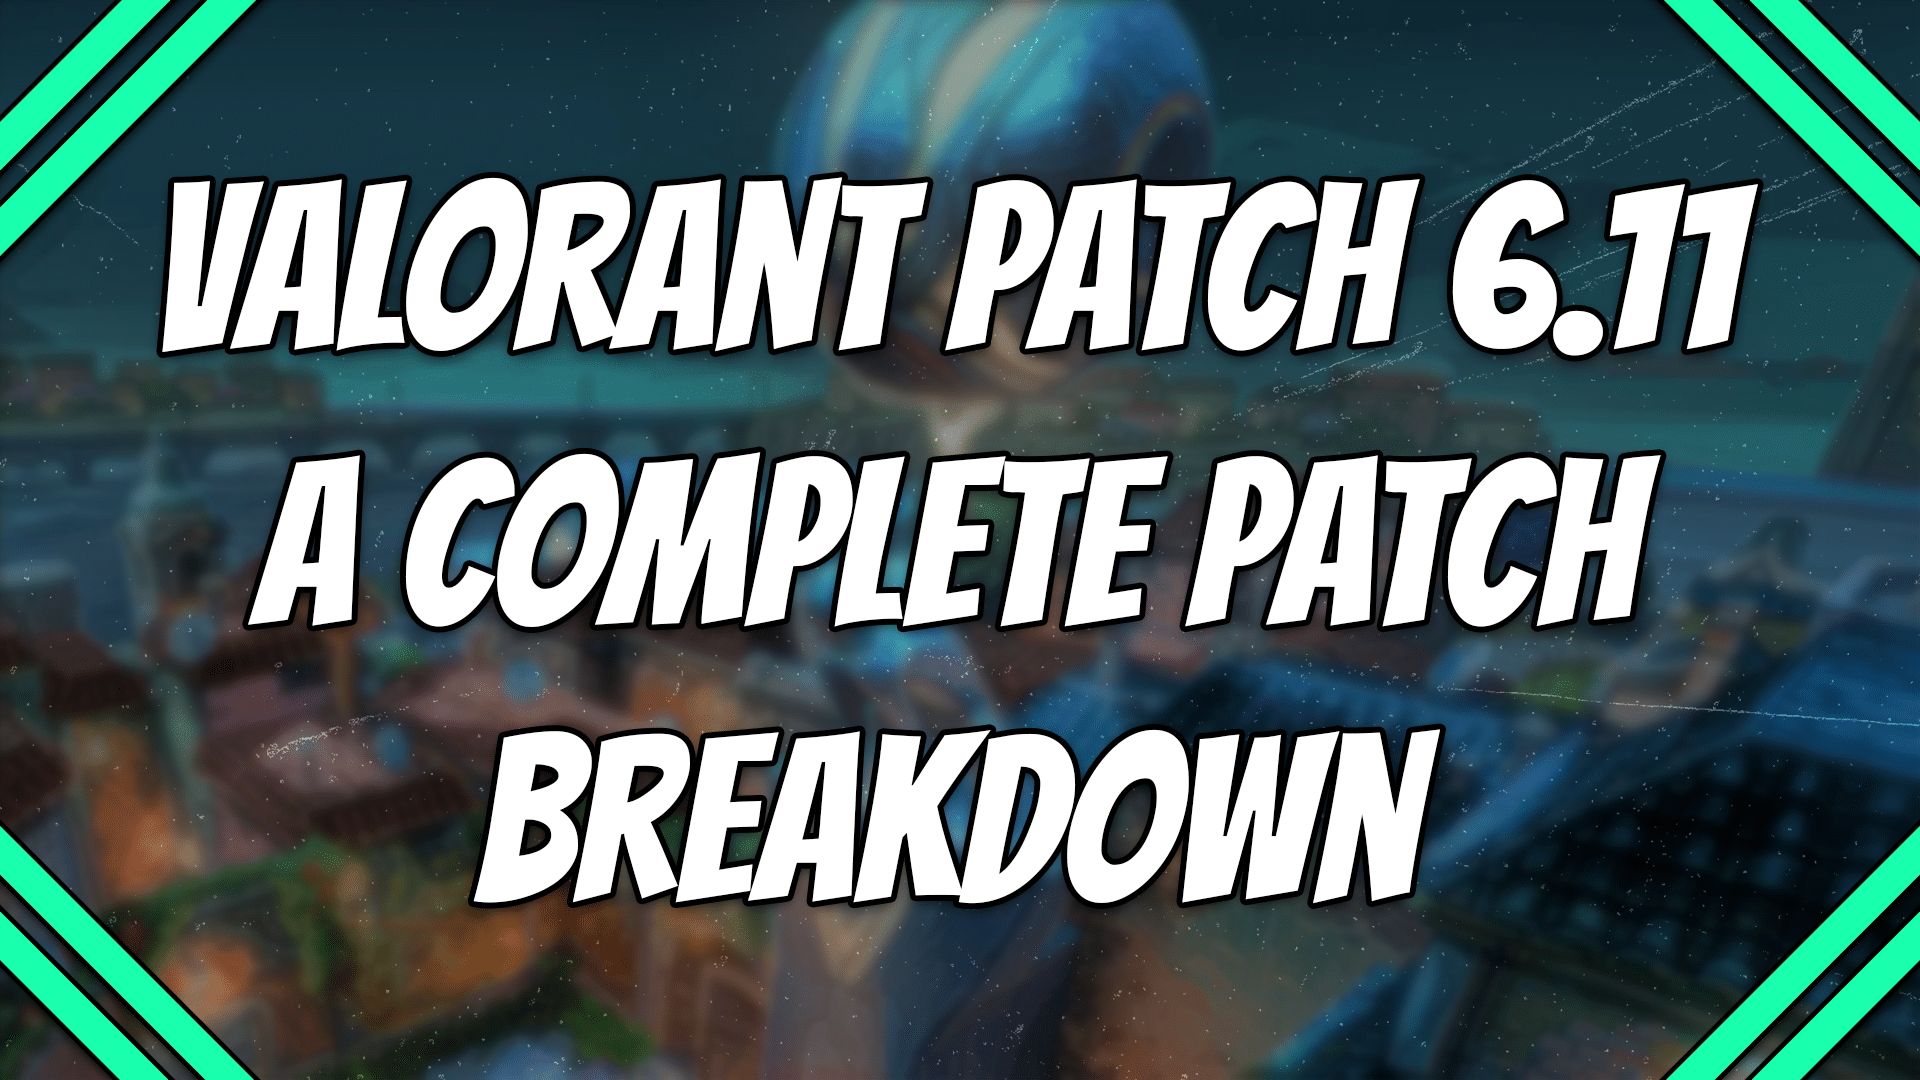 Valorant Pearl Map B Site Changes in Patch 6.11 Update